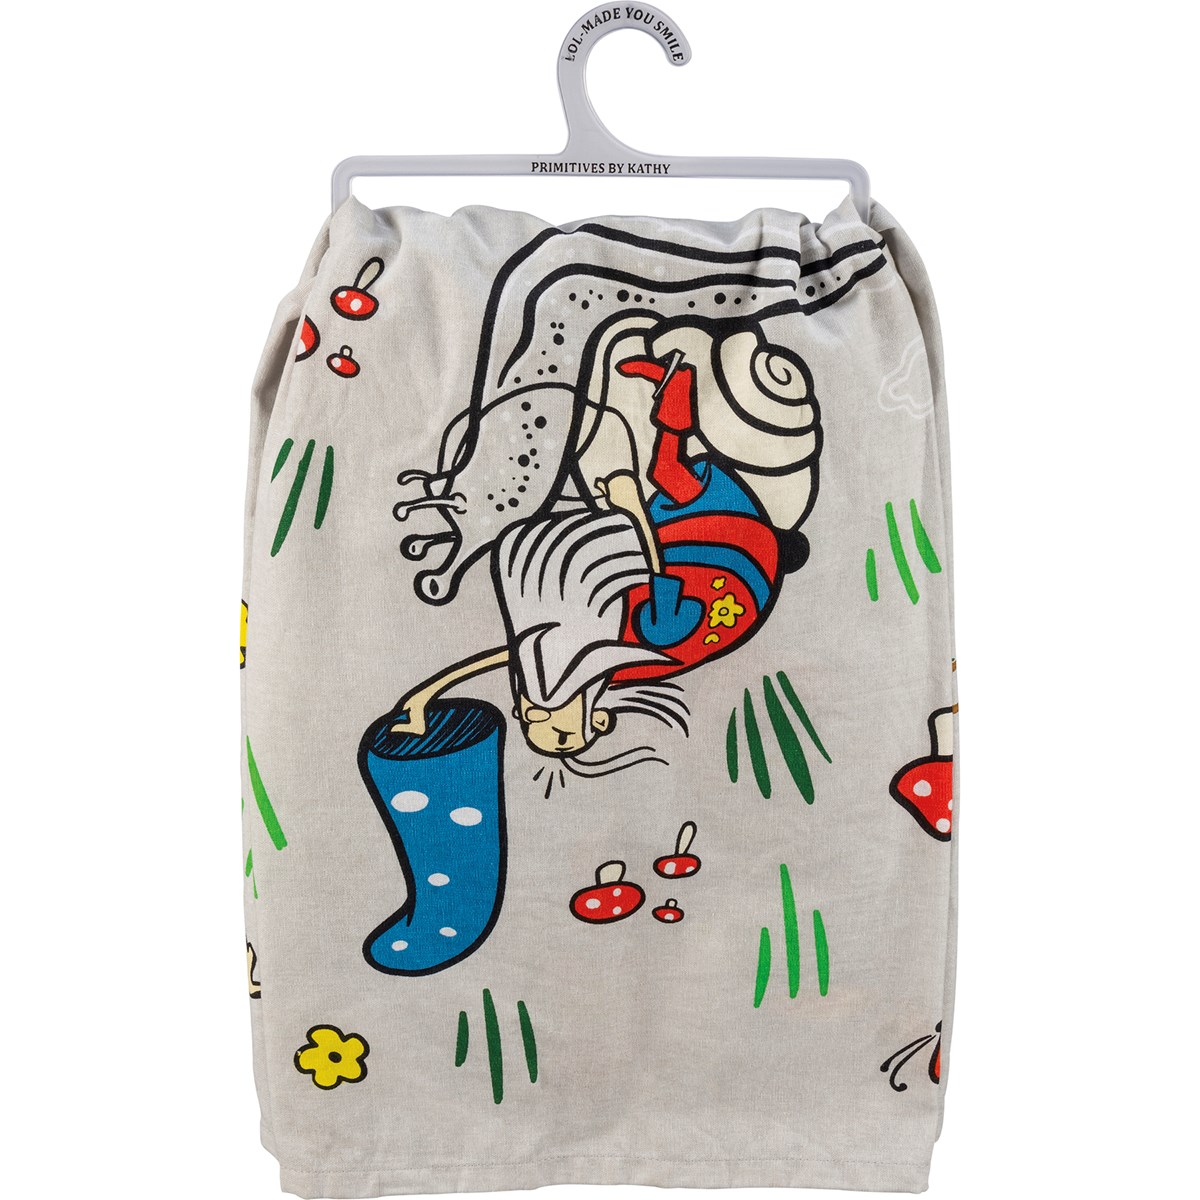 House Is Not A Home Without Gnome Kitchen Towel - Cotton